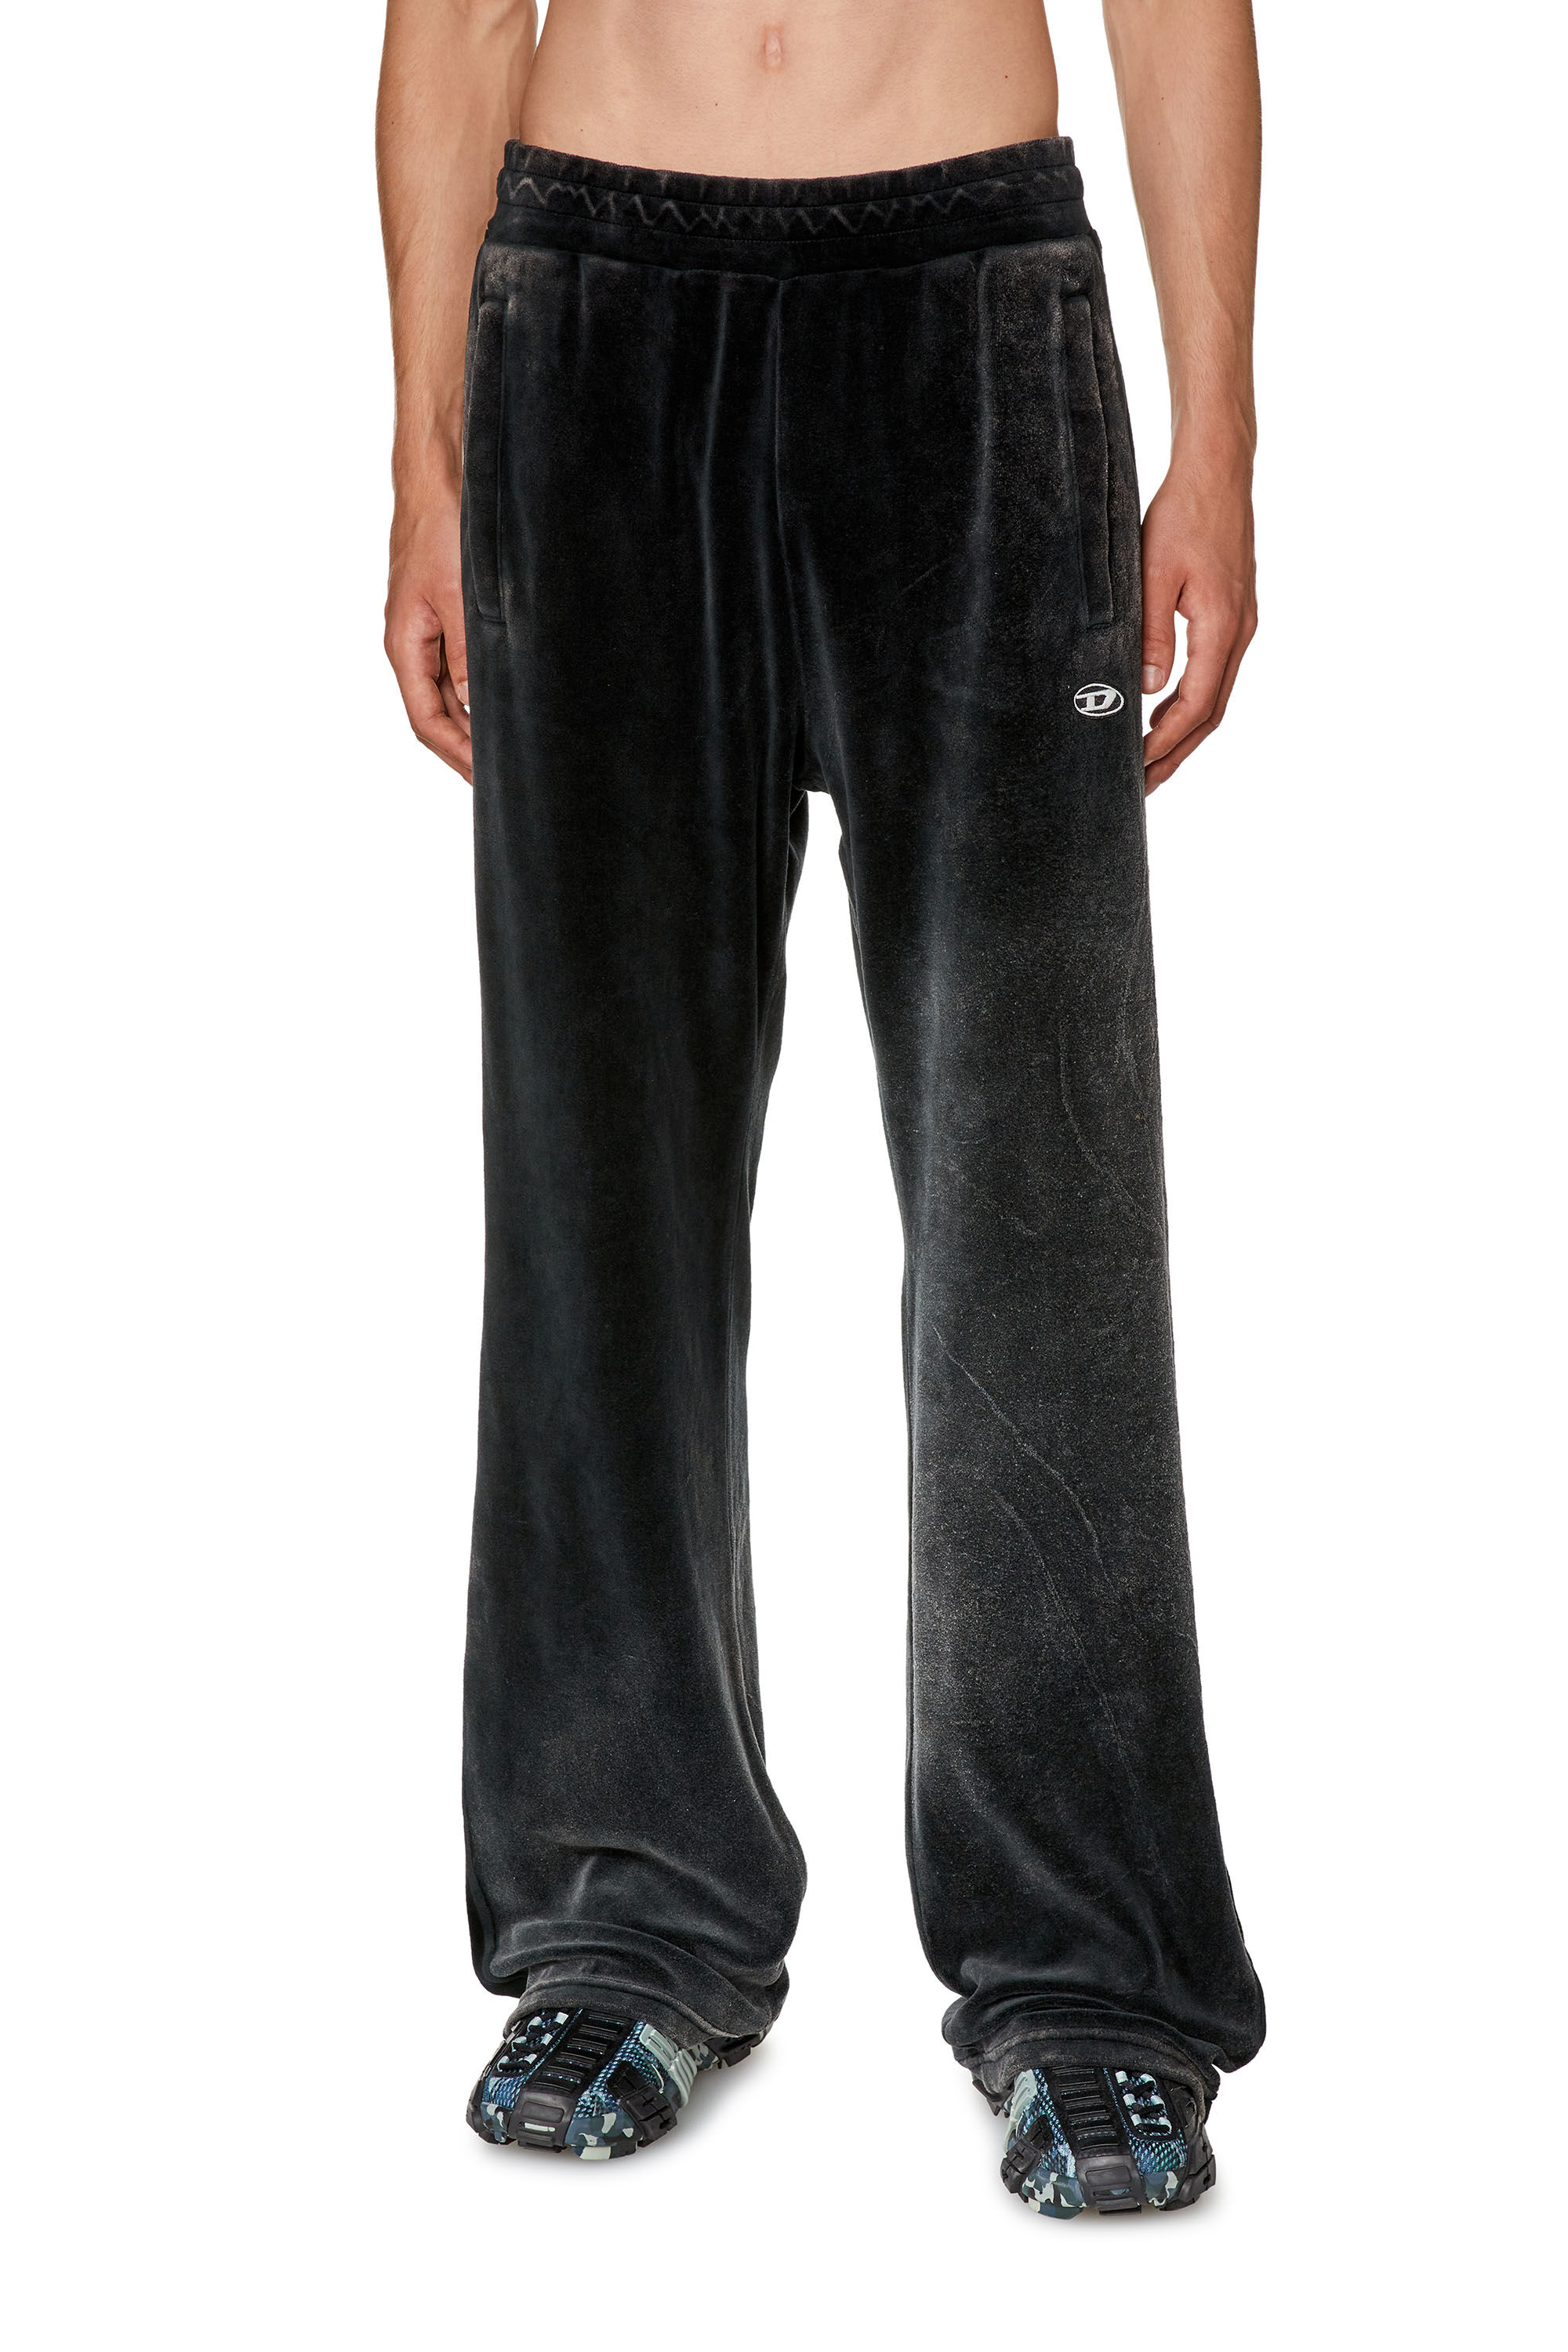 Men's Chenille track pants with side bands | Black | Diesel